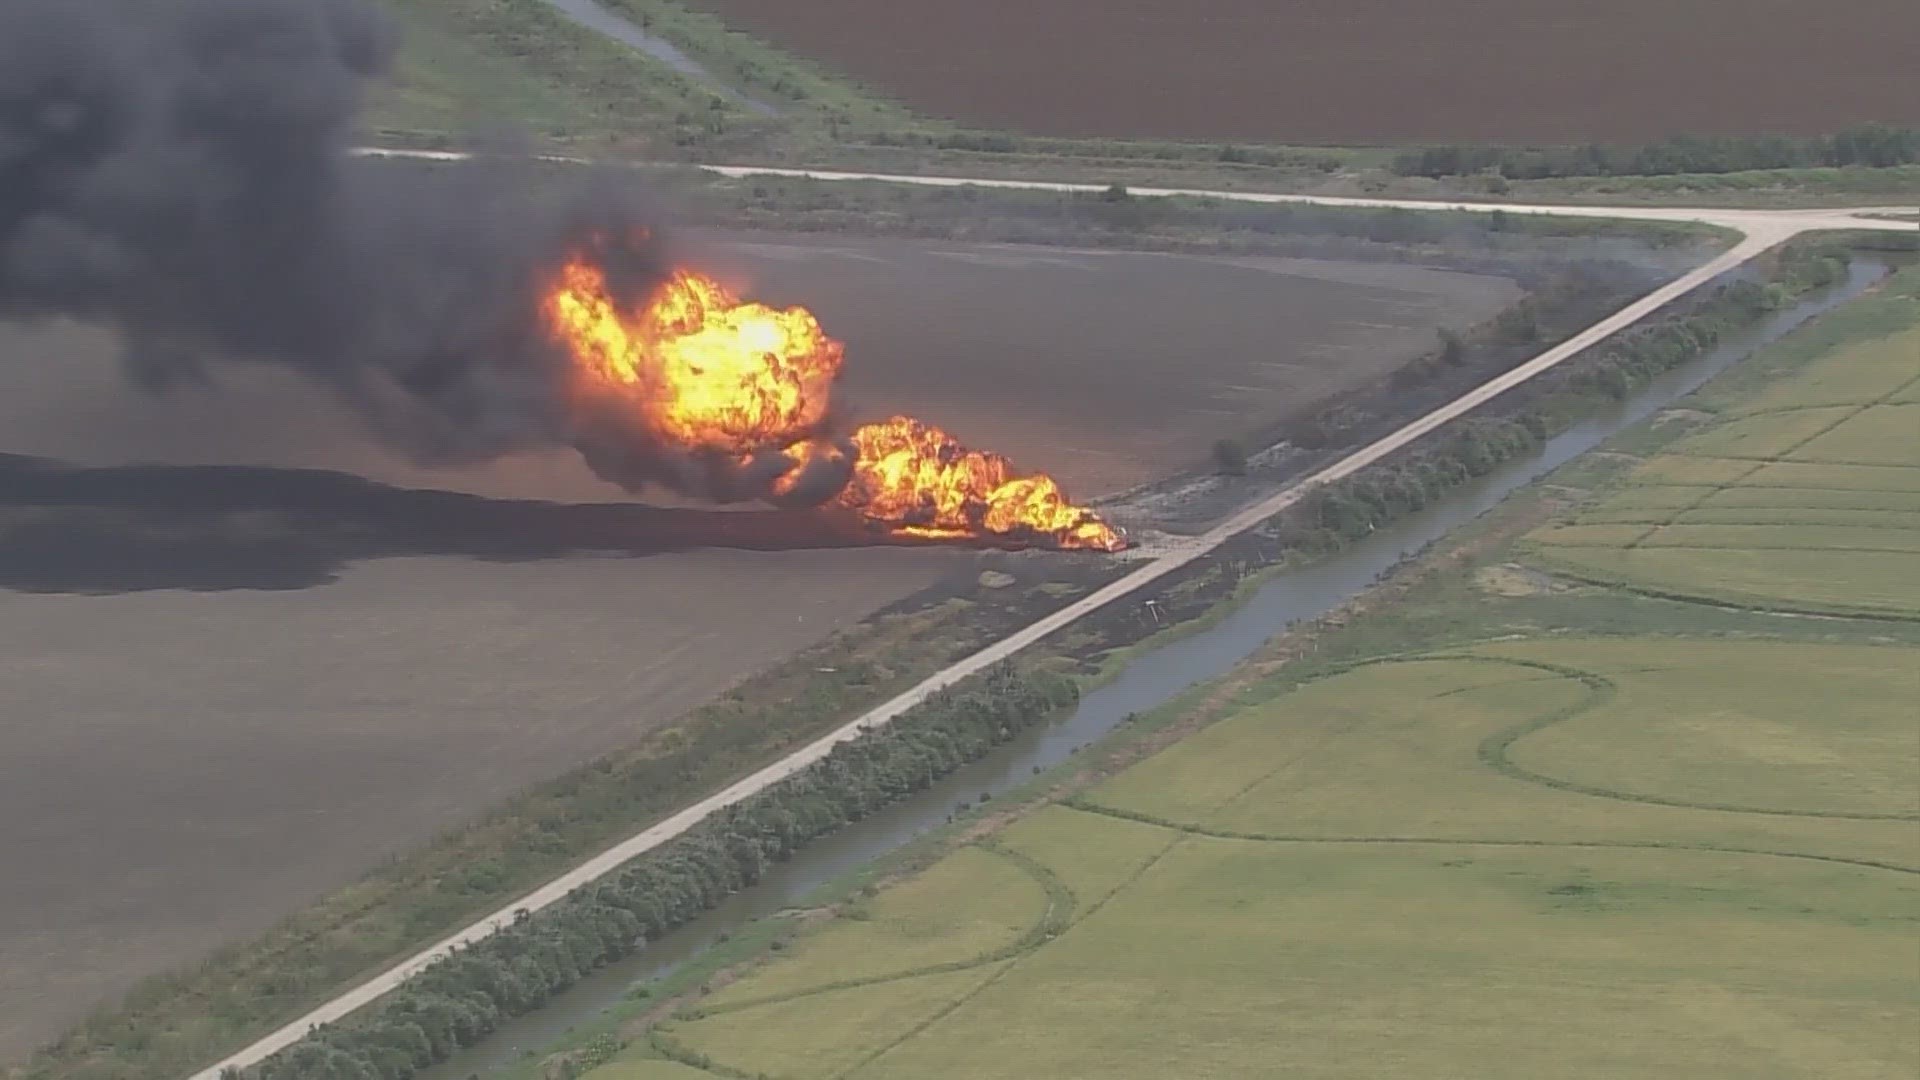 The legal department of the pipeline owner said two flammable gasses were burning -- ethylene and propylene.